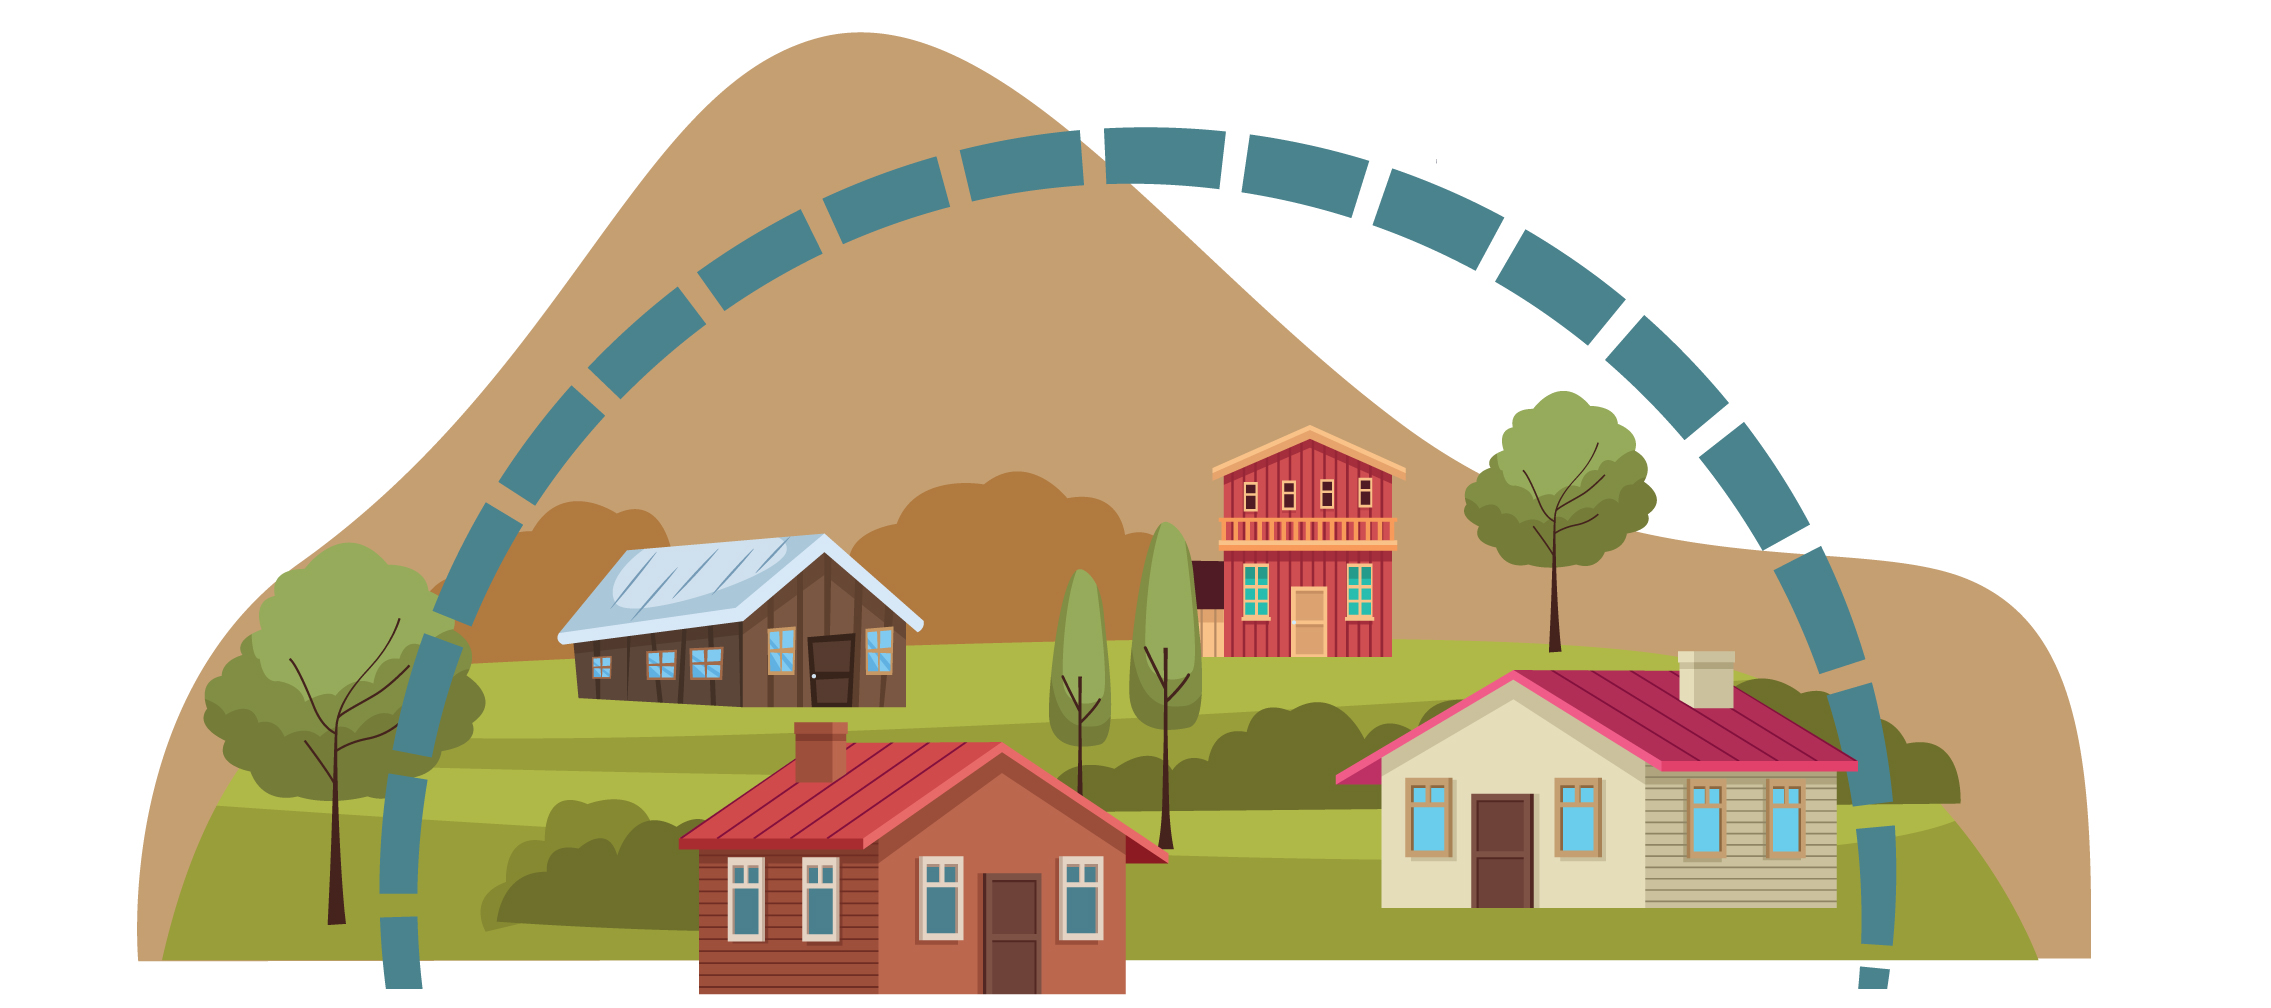 Illustration of Homes with Trees and Mountains Under a Dashed Line